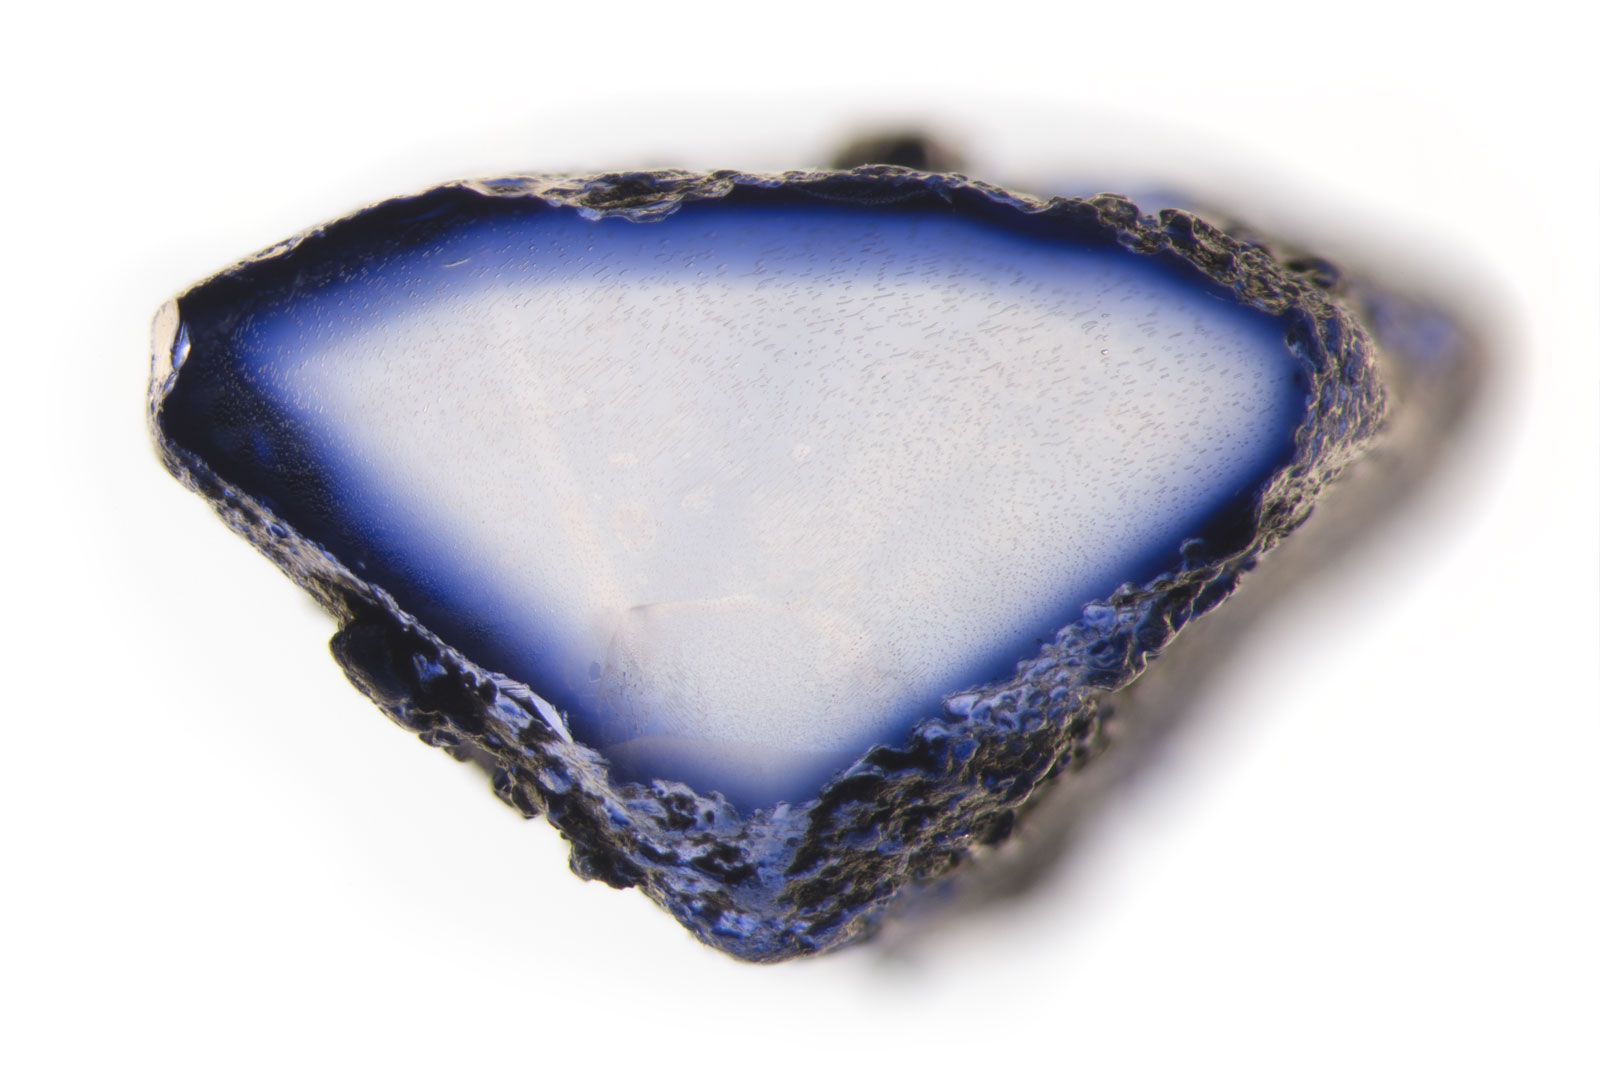 Near colorless sapphire that was lattice-diffused with titanium (Ti) that has been sliced through to show the depth of penetration of the chromophore. Because the chromophore added from outside the stone and because recutting the stone could produce loss of color, this treatment requires special disclosure.